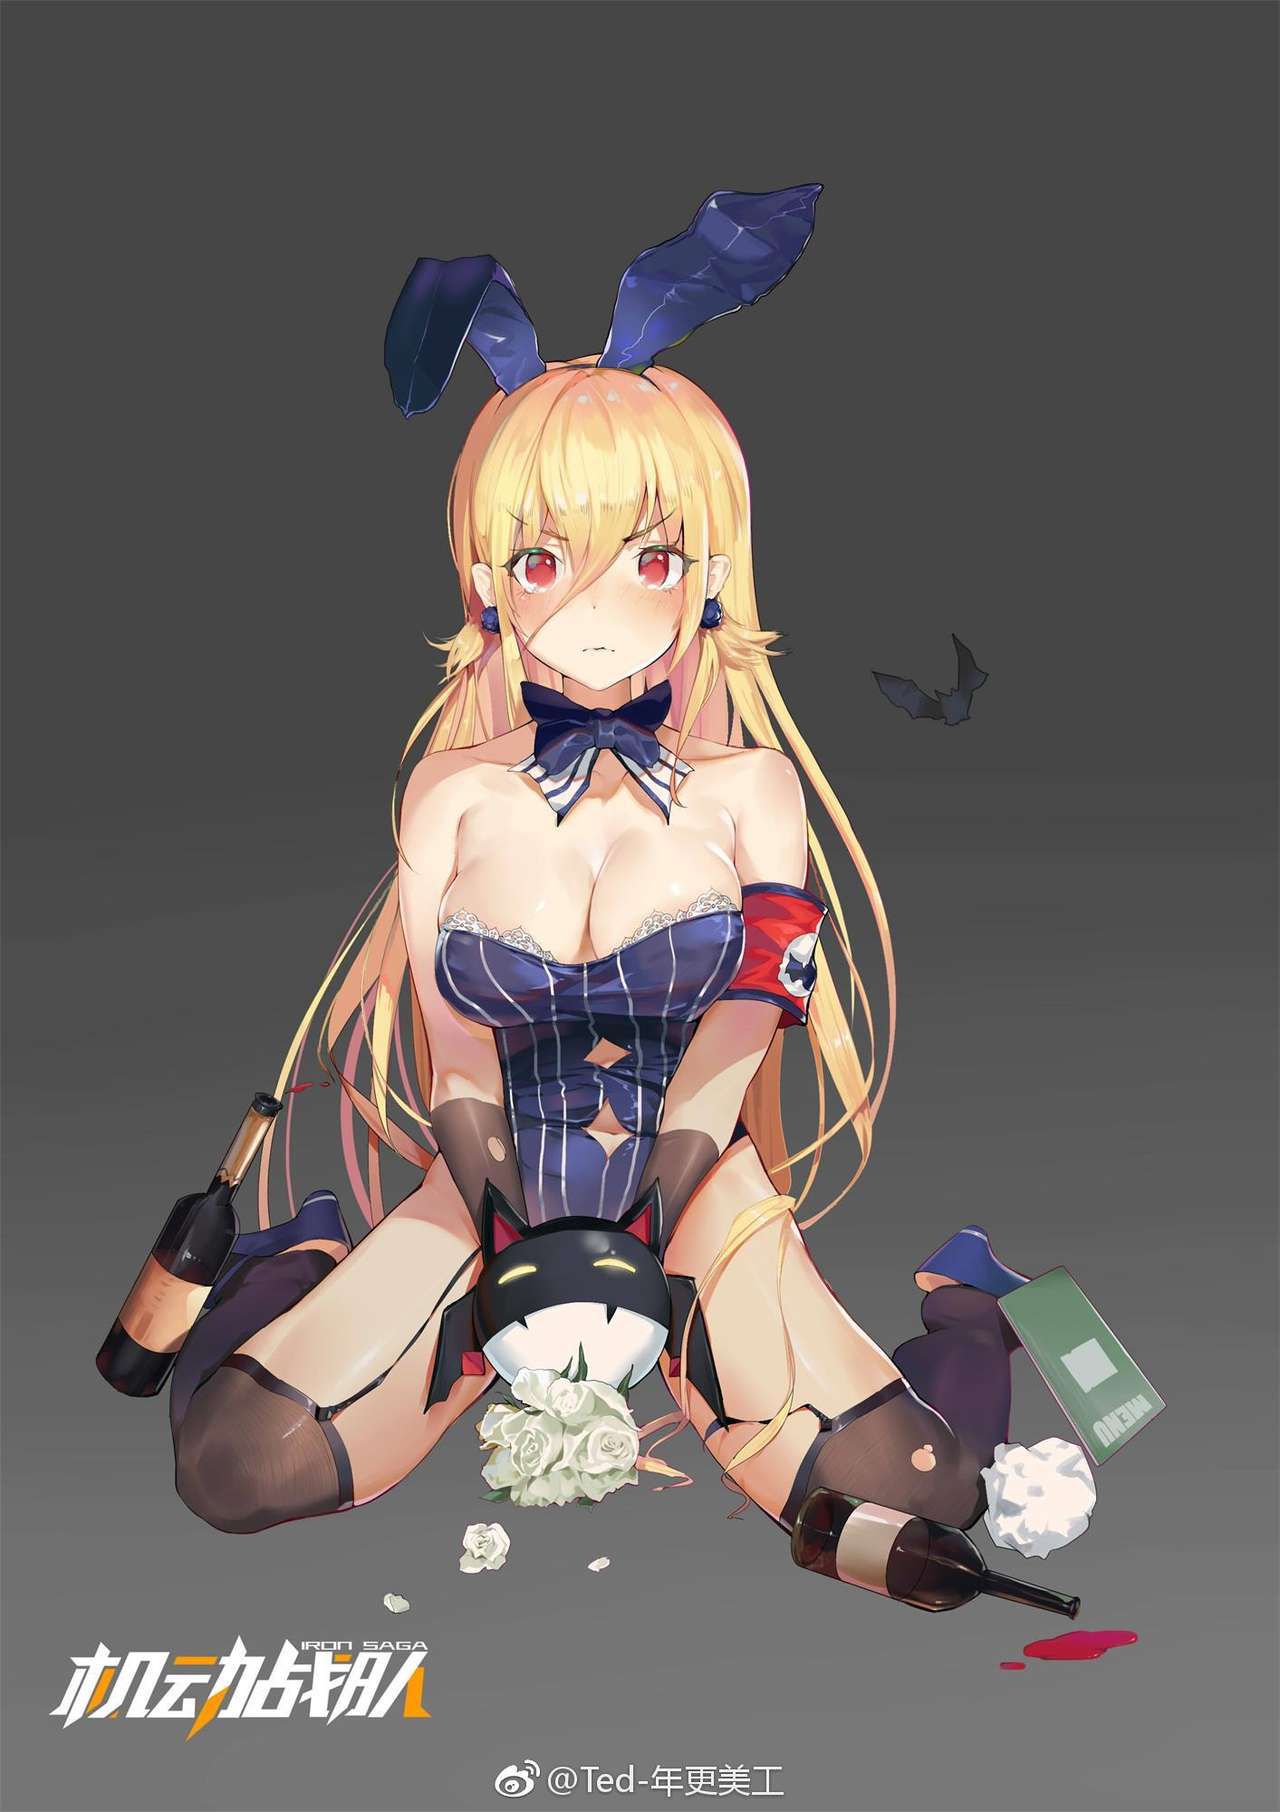 [Pixiv] Ted (15198823) [Pixiv] Ted (15198823) 17